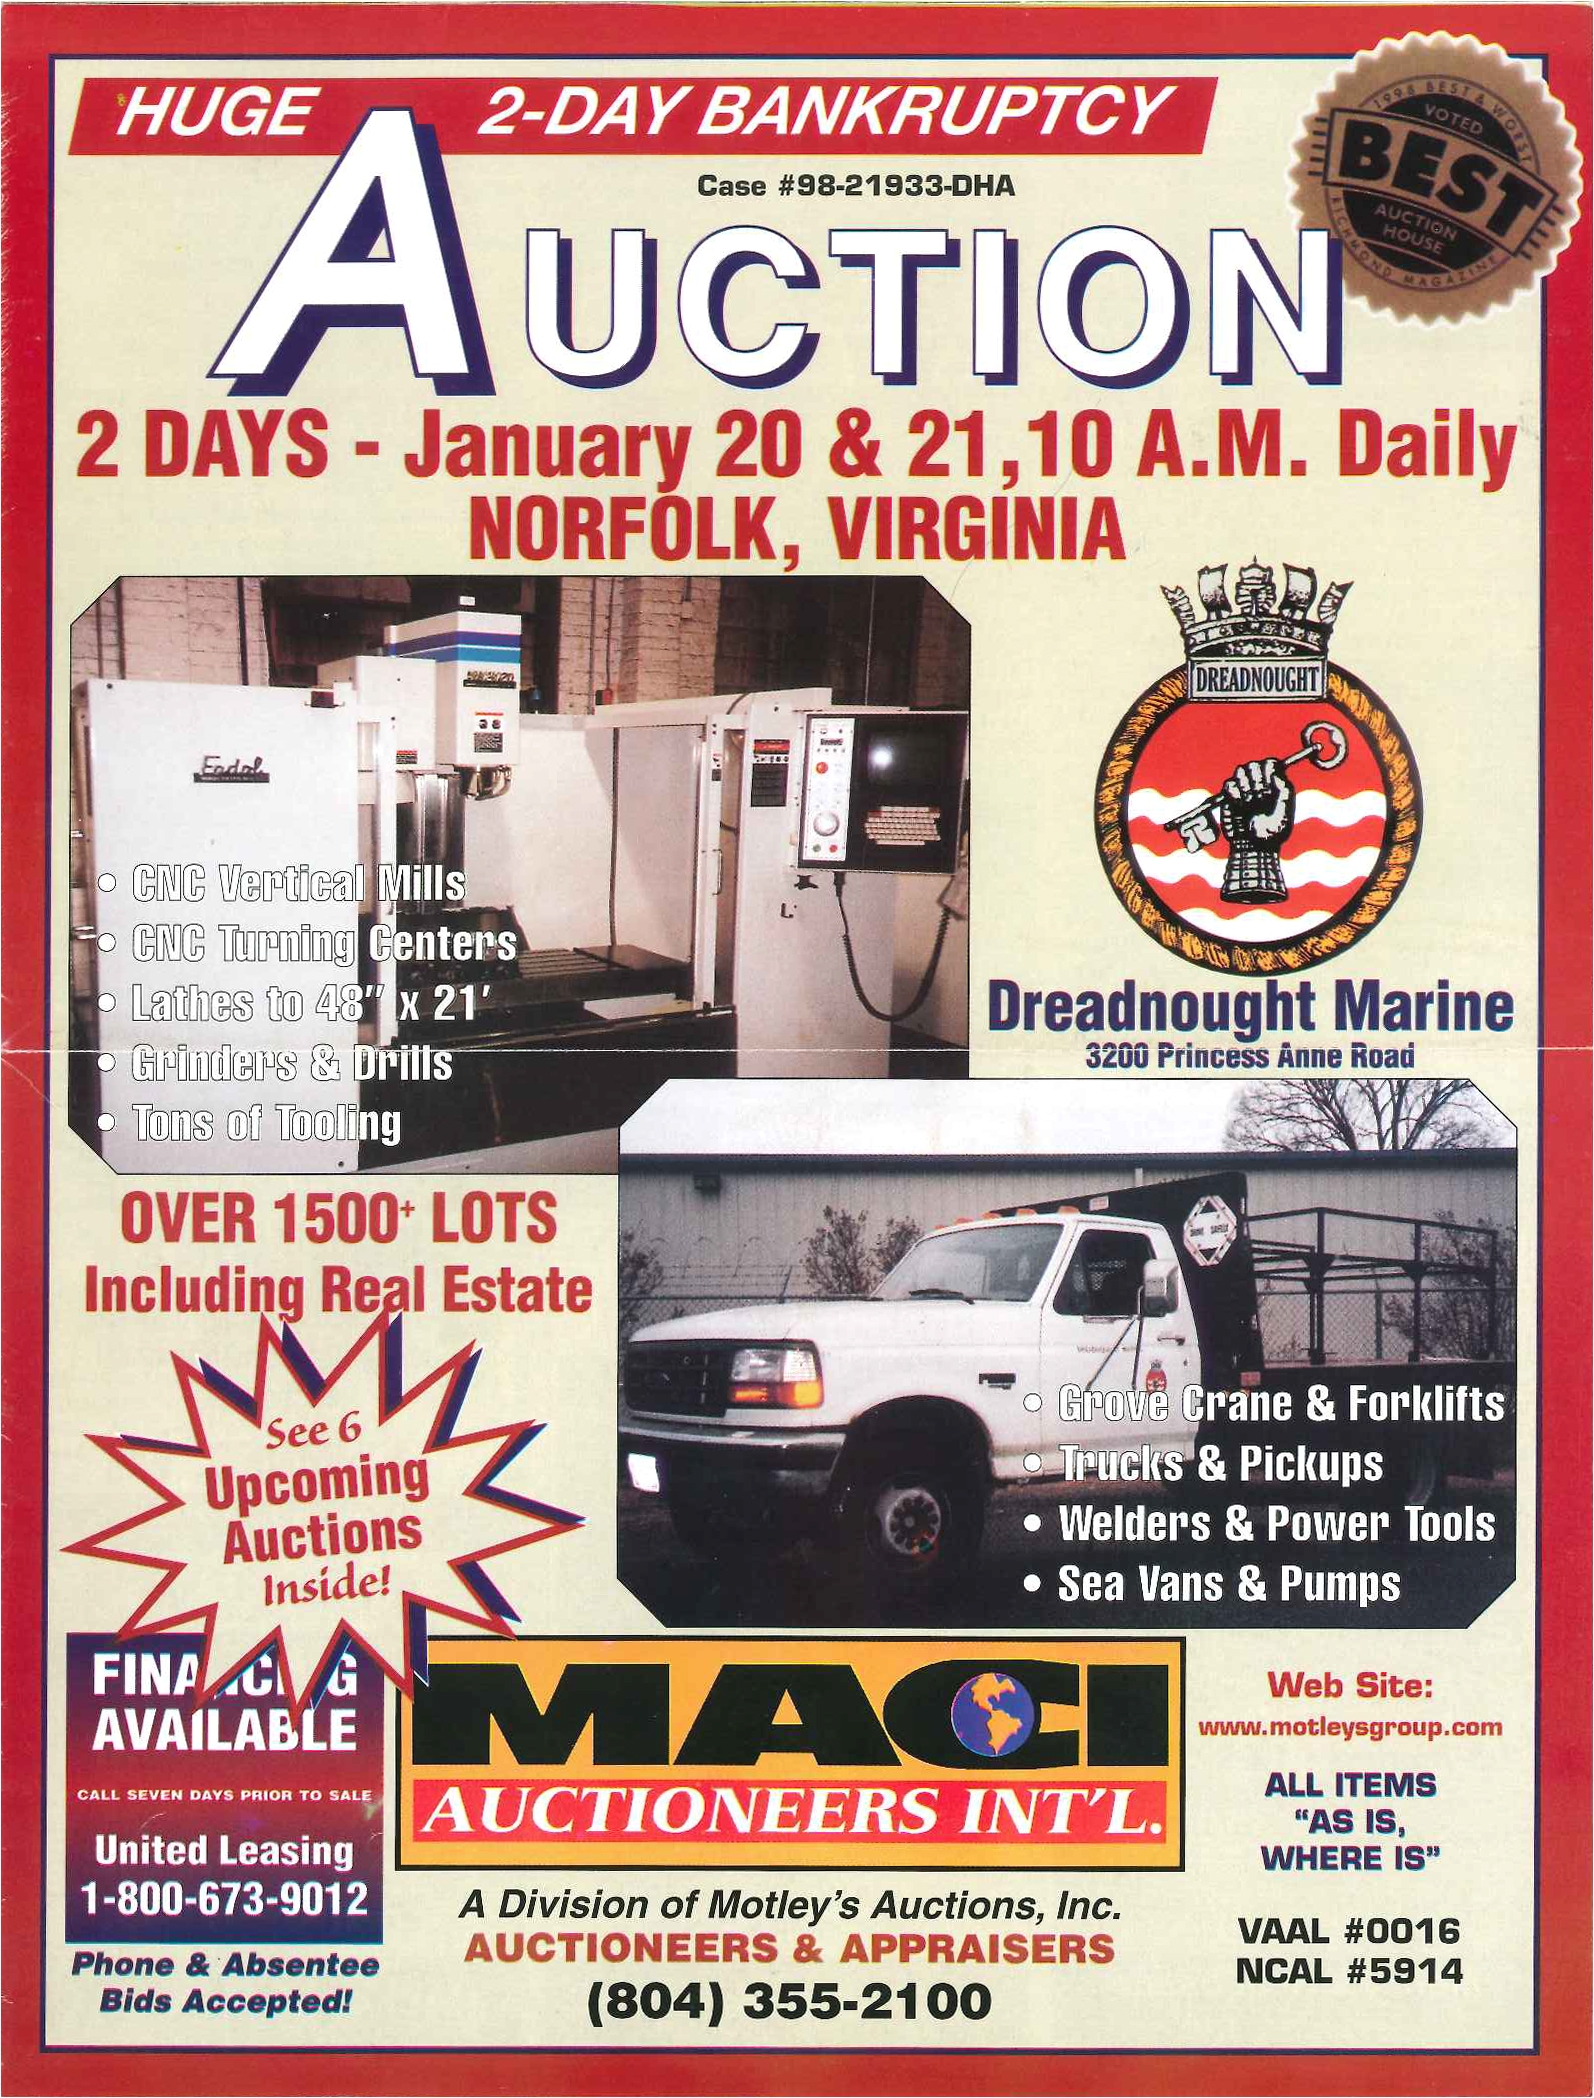 dreadnought marine bankruptcy auction